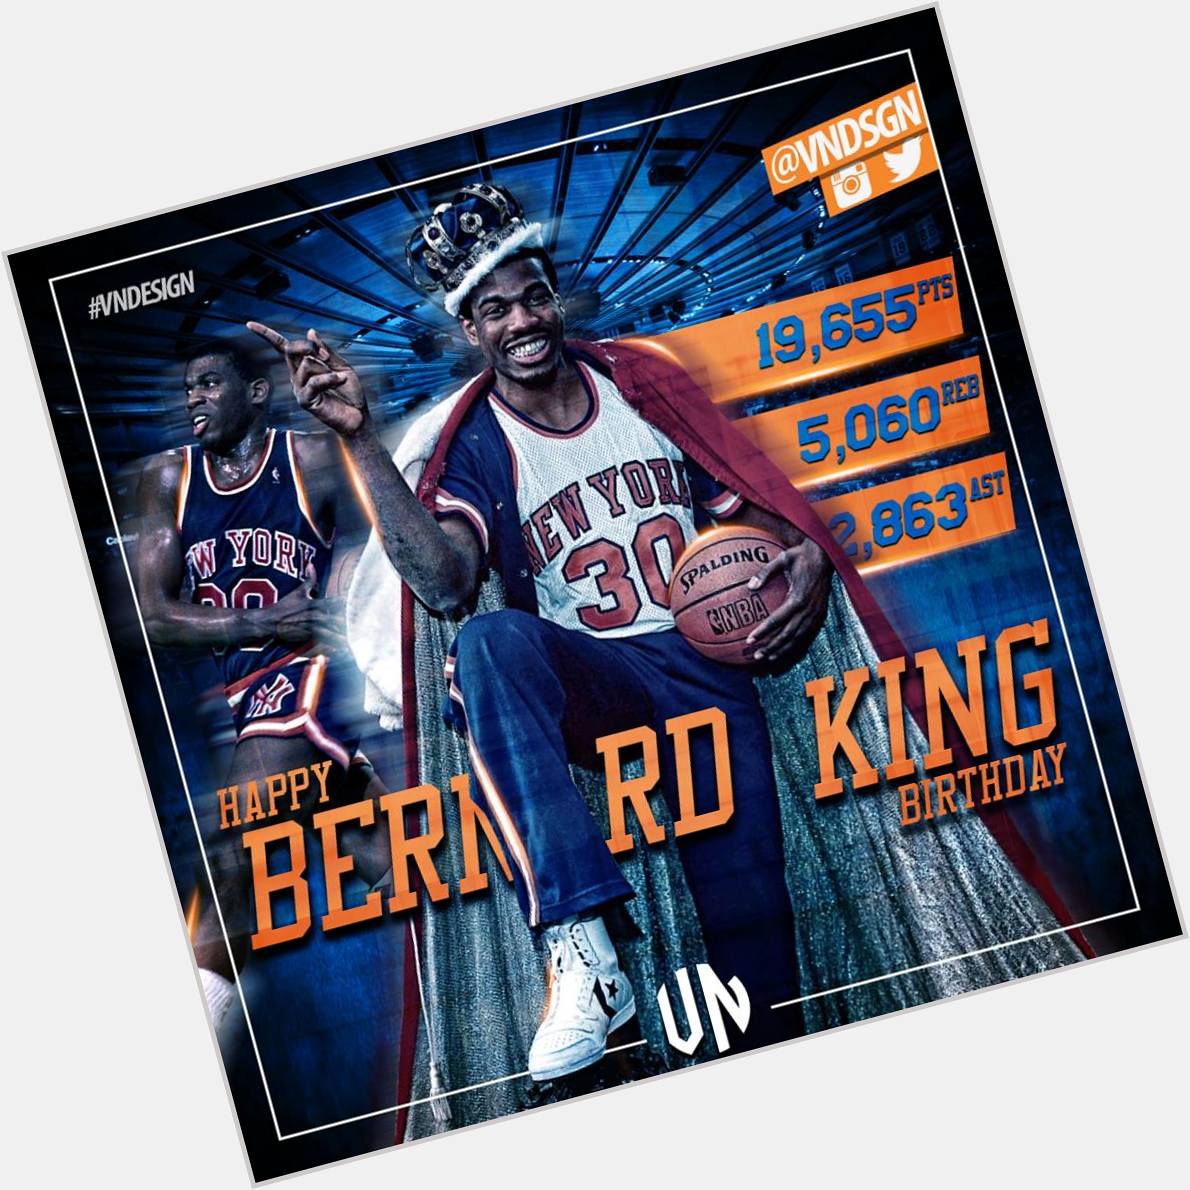 Join me in wishing a happy birthday to Bernard King ! 